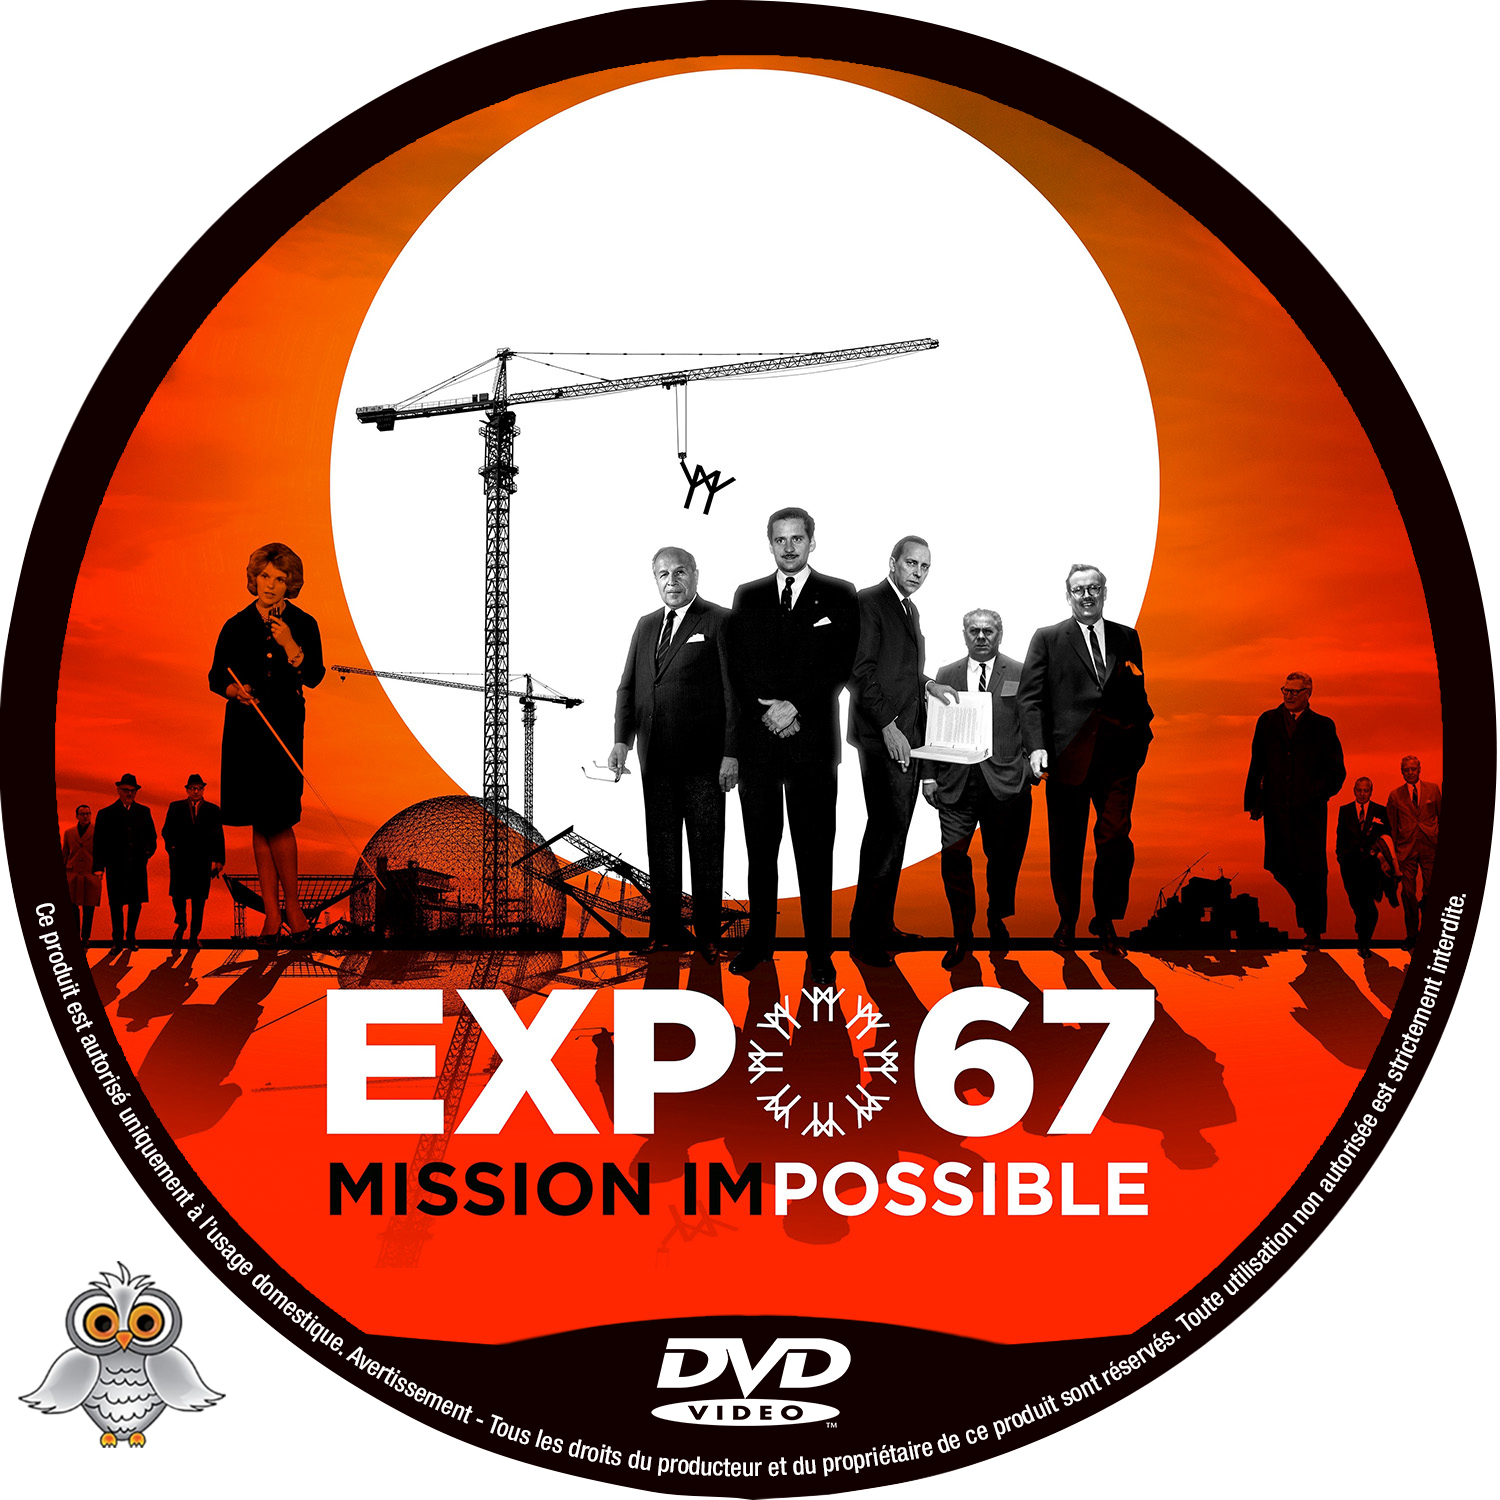 Expo 67 Mission Impossible custom